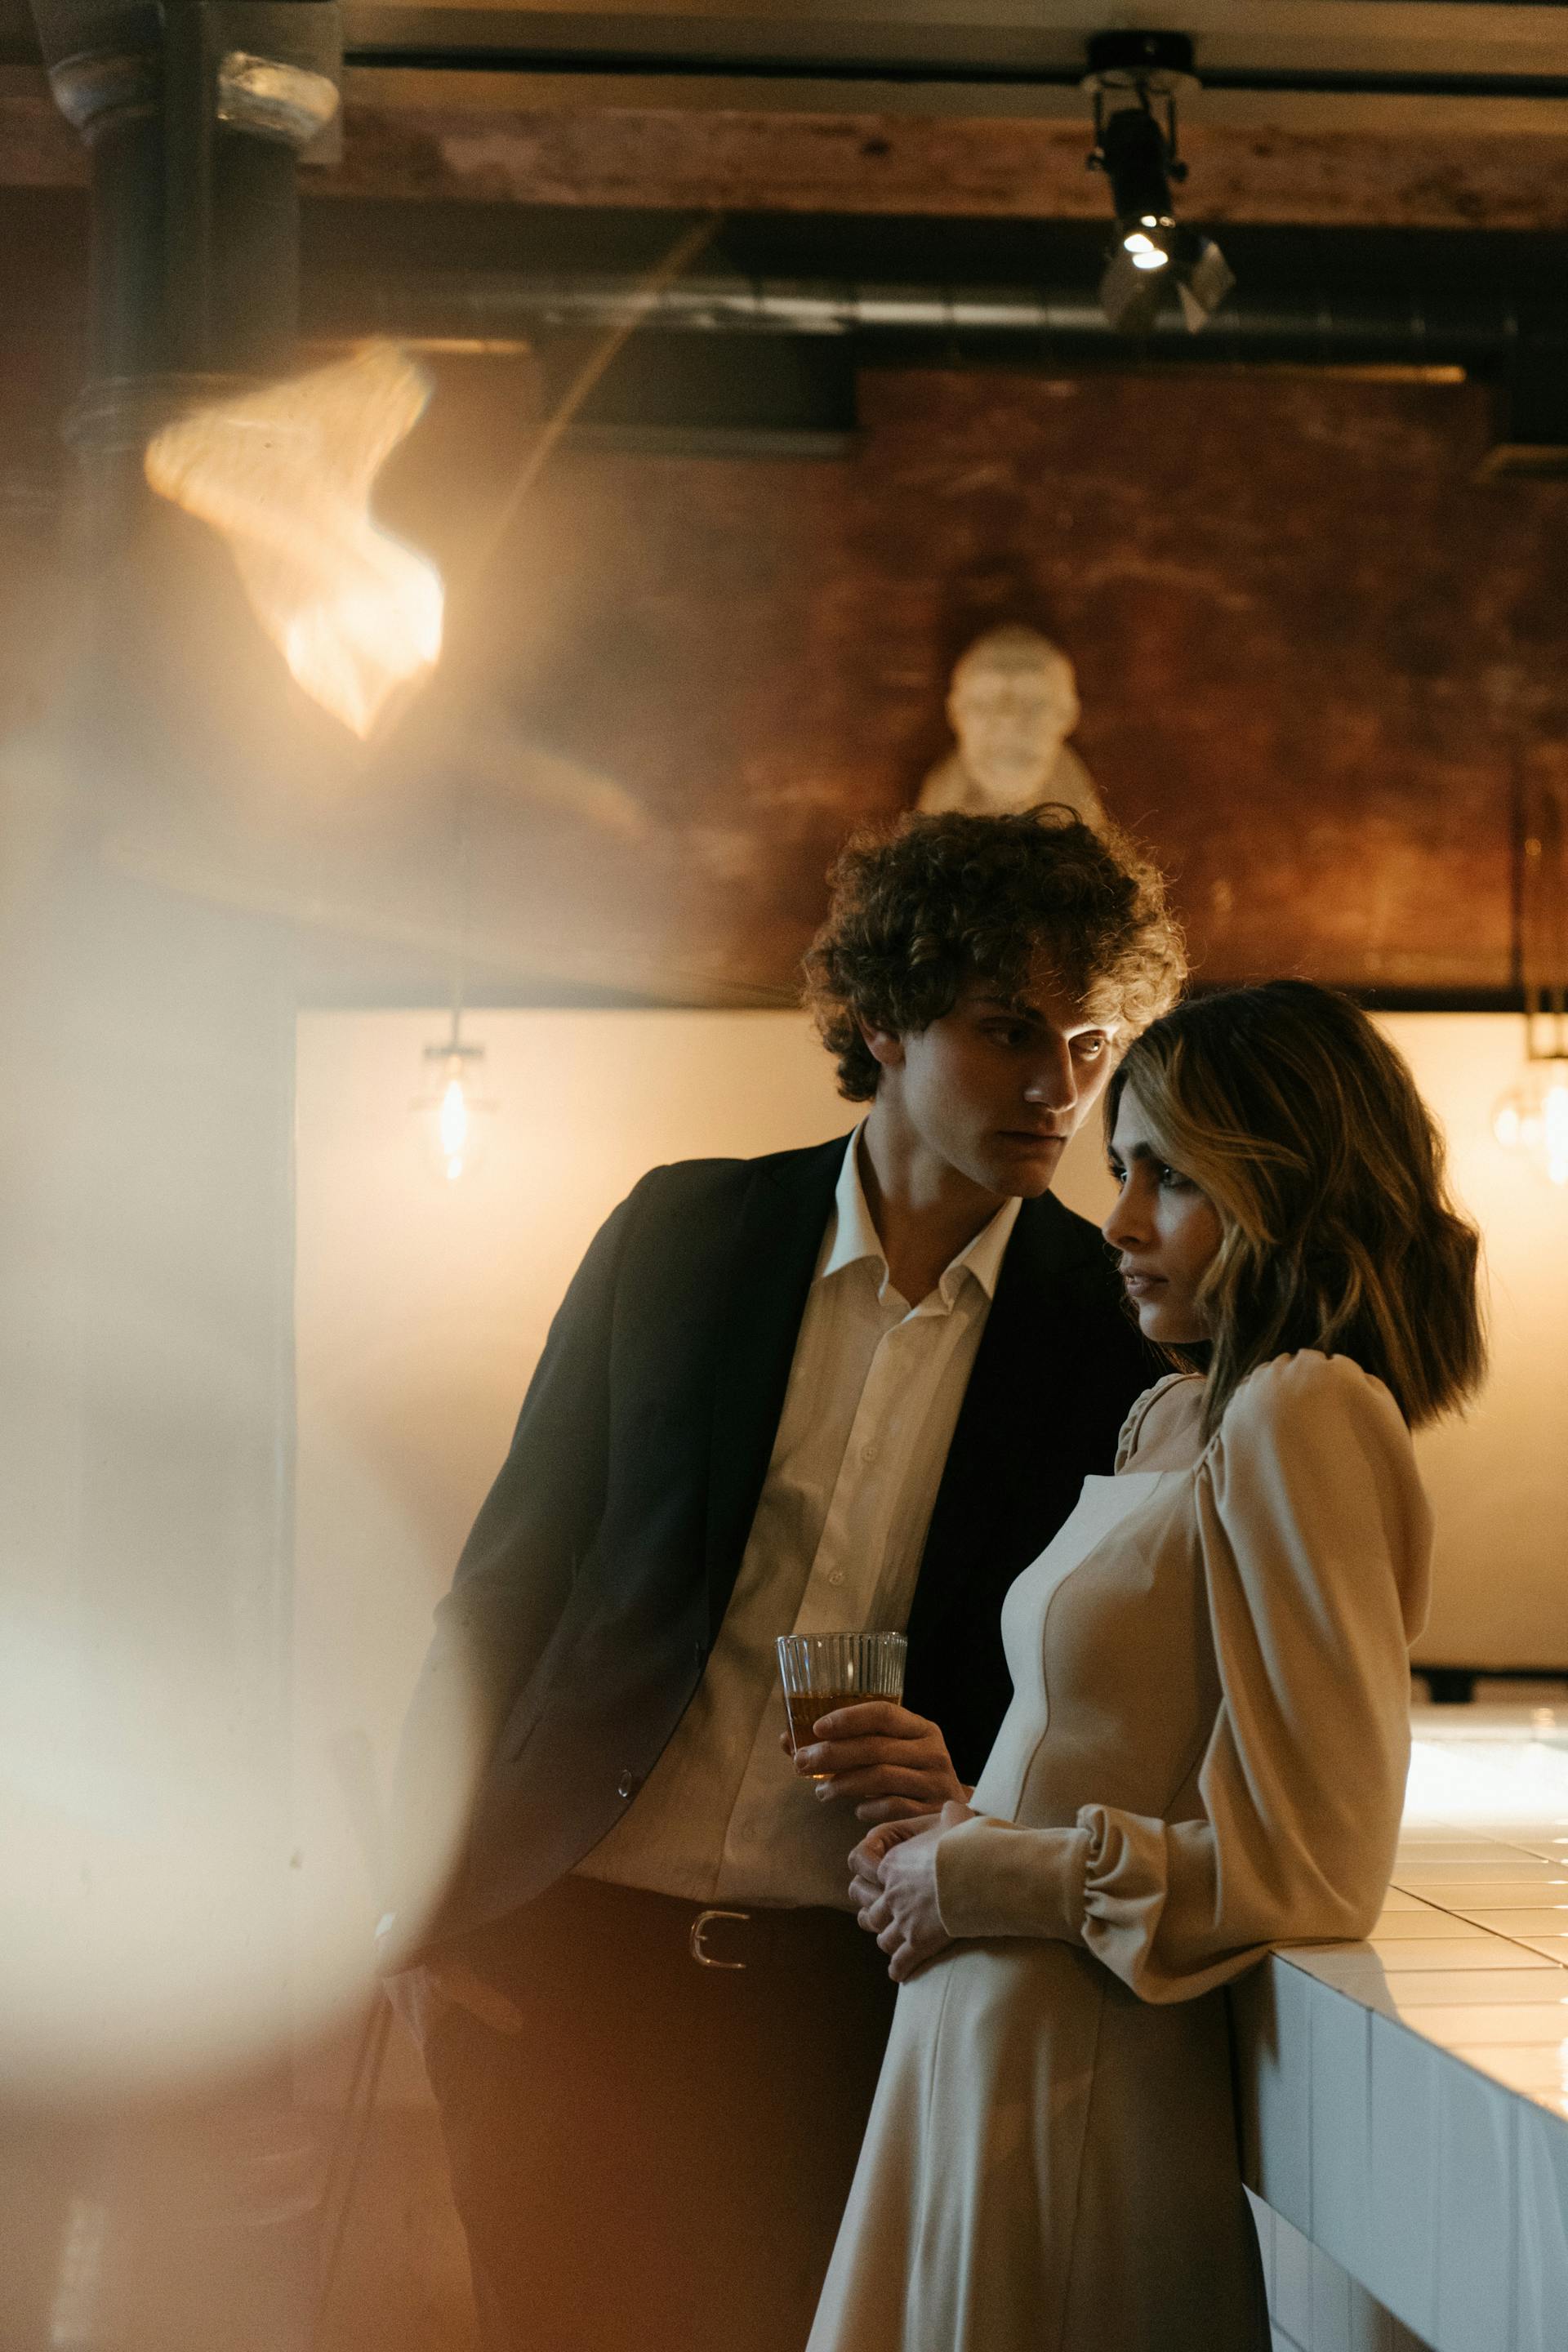 A man and woman in a pub | Source: Pexels